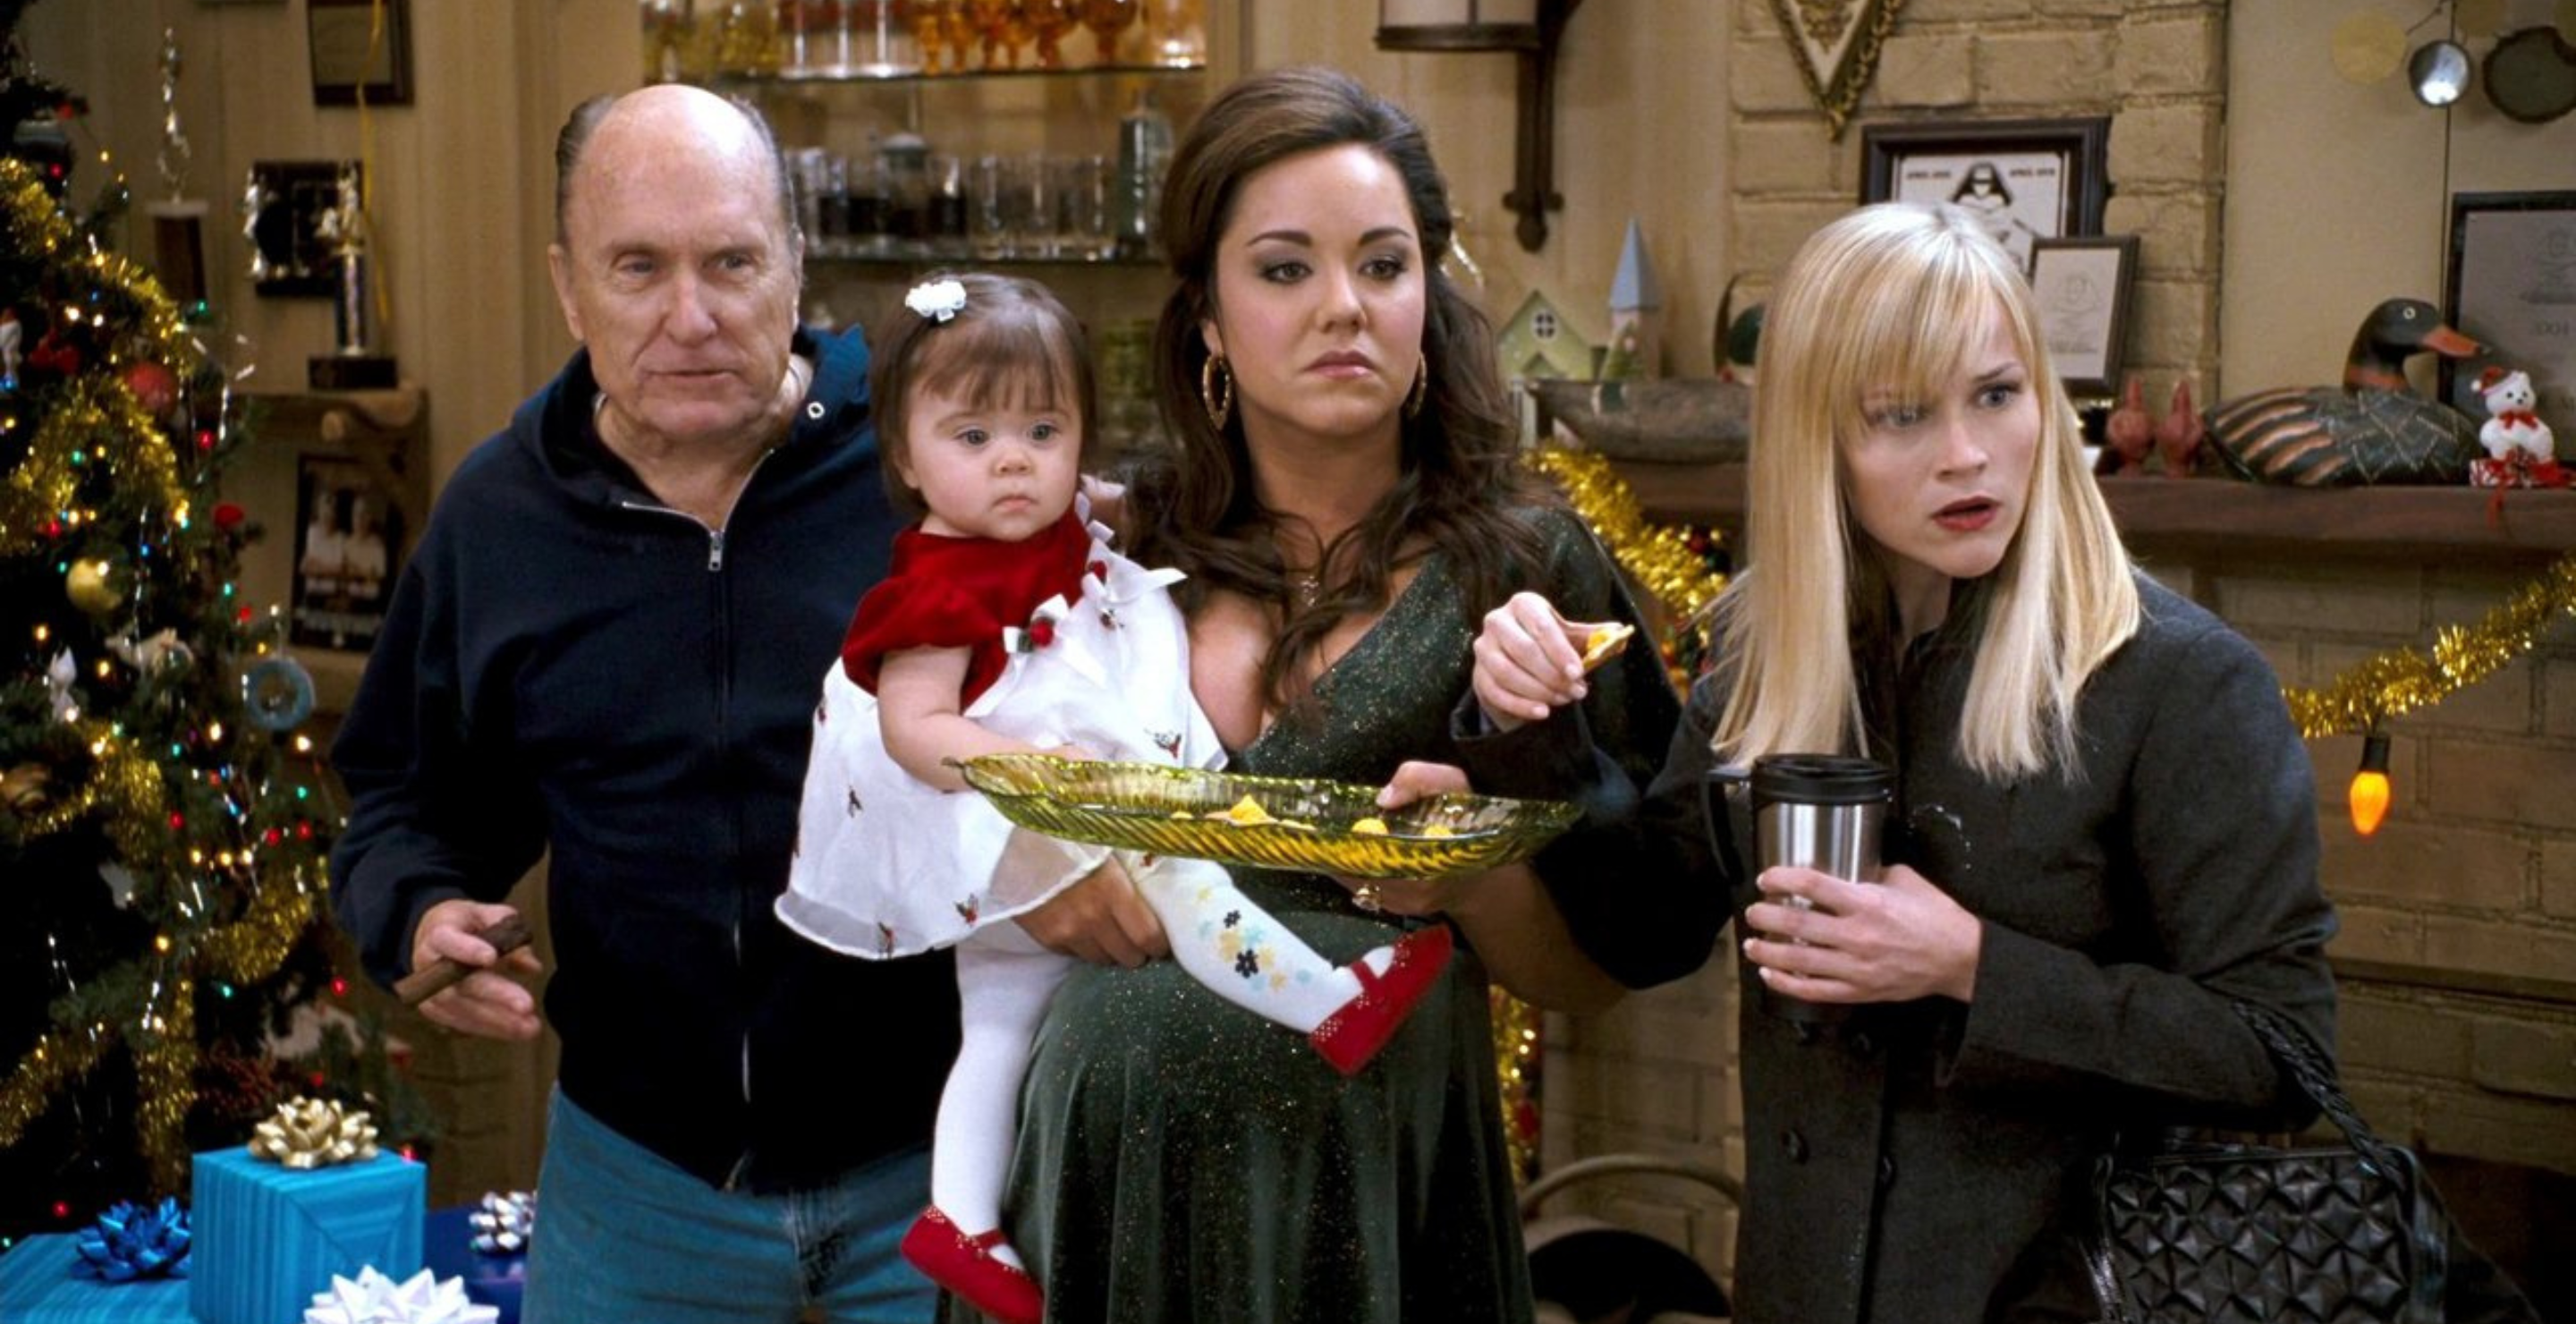 Robert Duvall, Reese Witherspoon, and Katy Mixon in Four Christmases (2008)